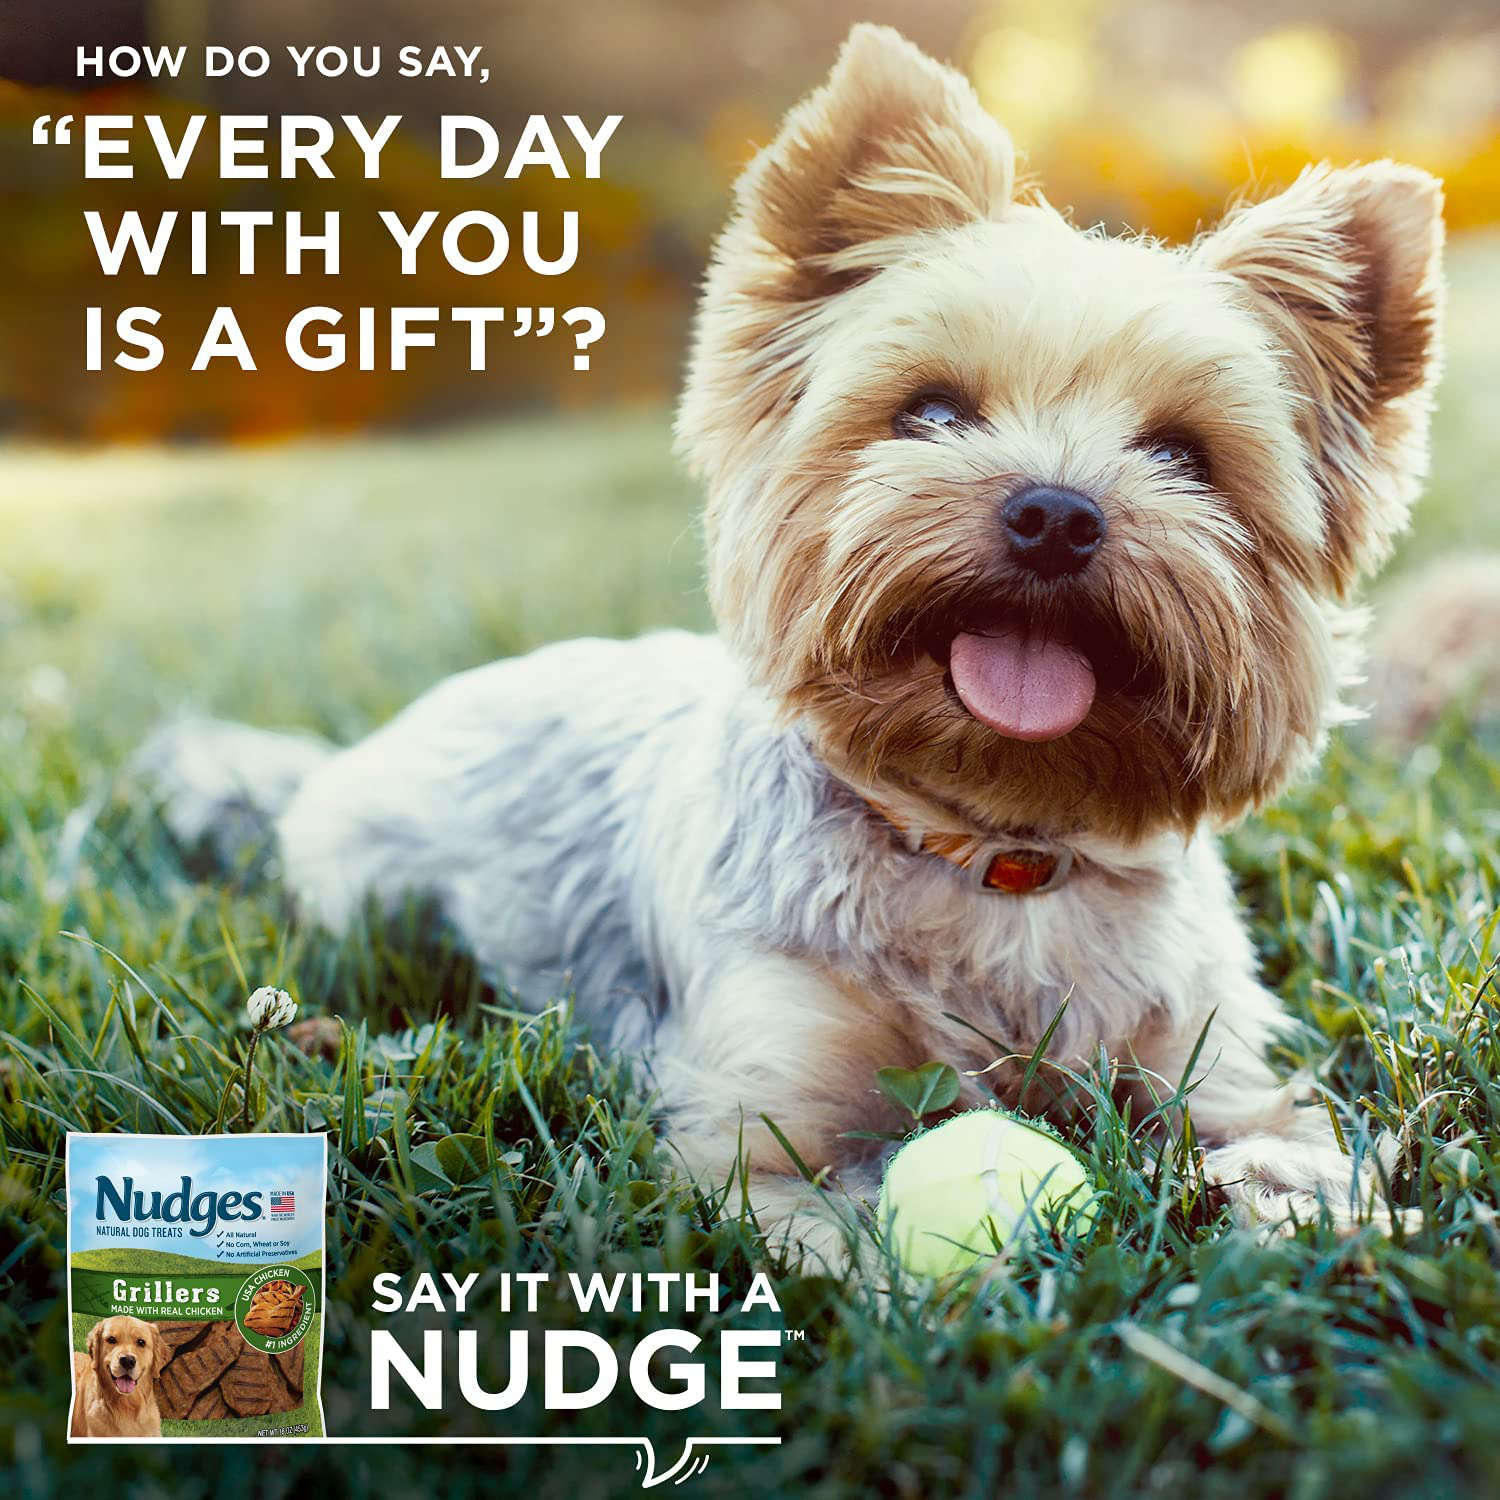 Nudges Natural Dog Treats Grillers Made with Real Chicken Animals & Pet Supplies > Pet Supplies > Dog Supplies > Dog Treats Nudges   